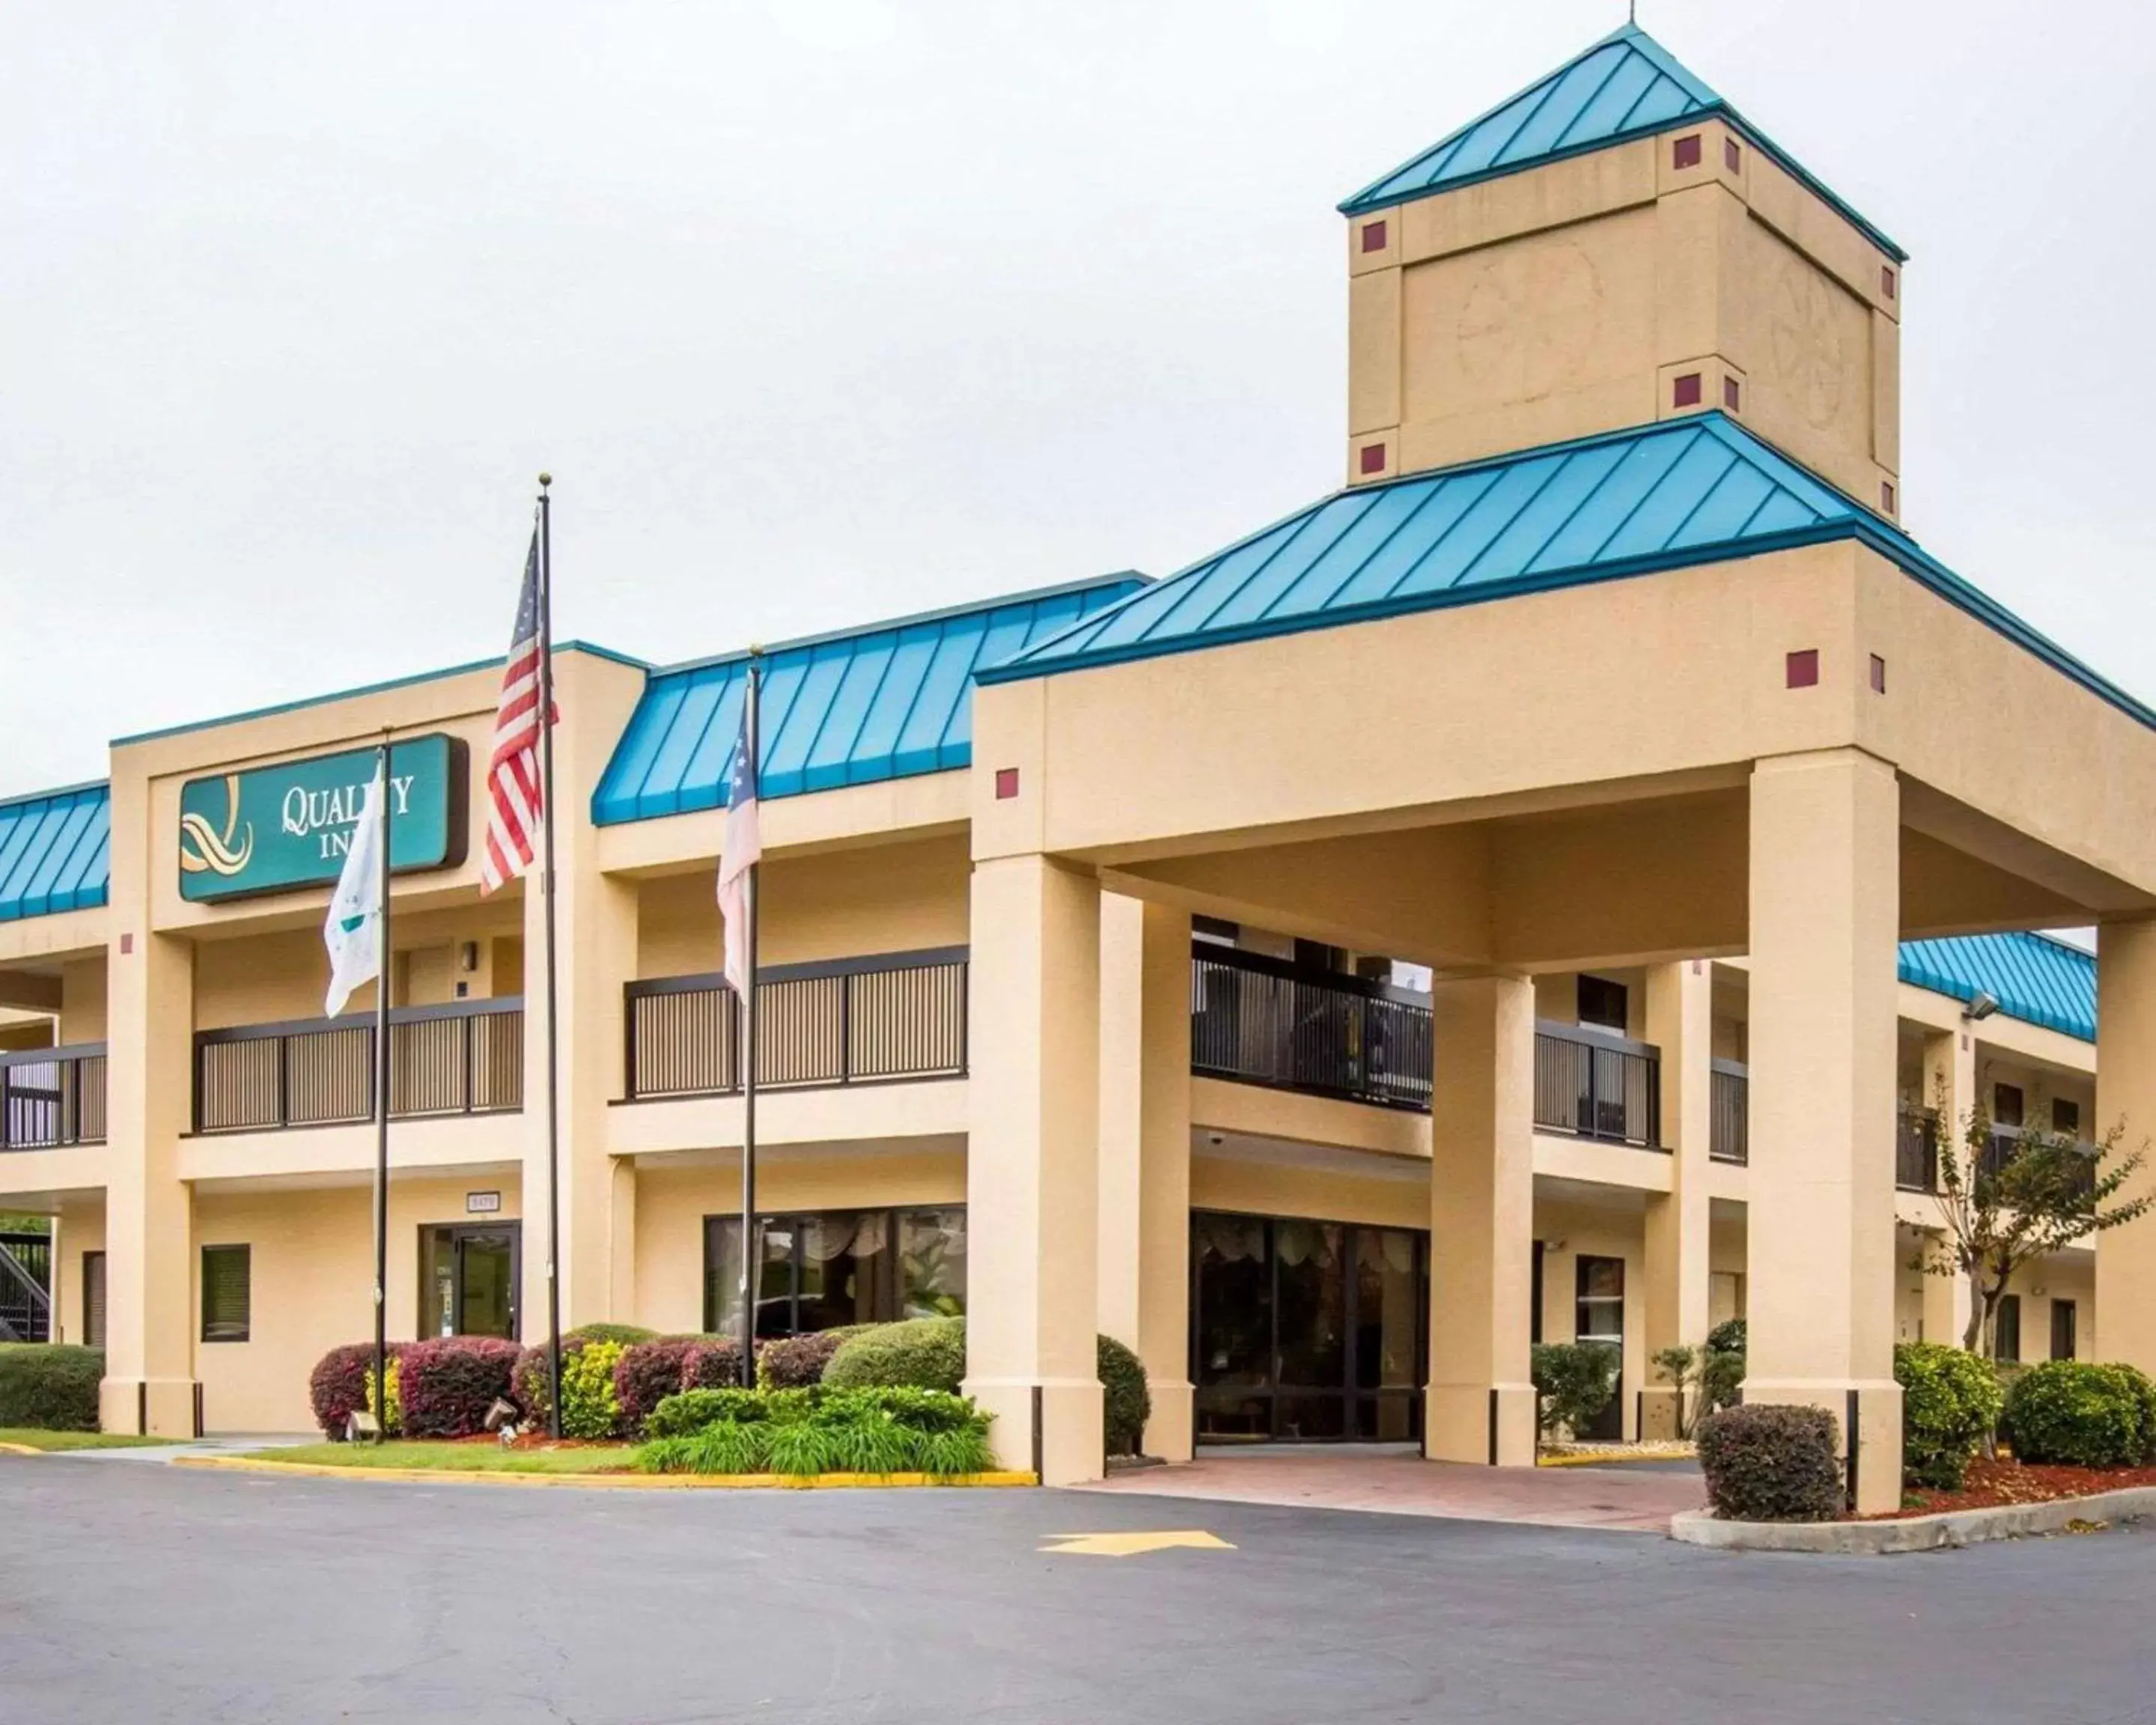 Property building in Quality Inn near Six Flags Douglasville